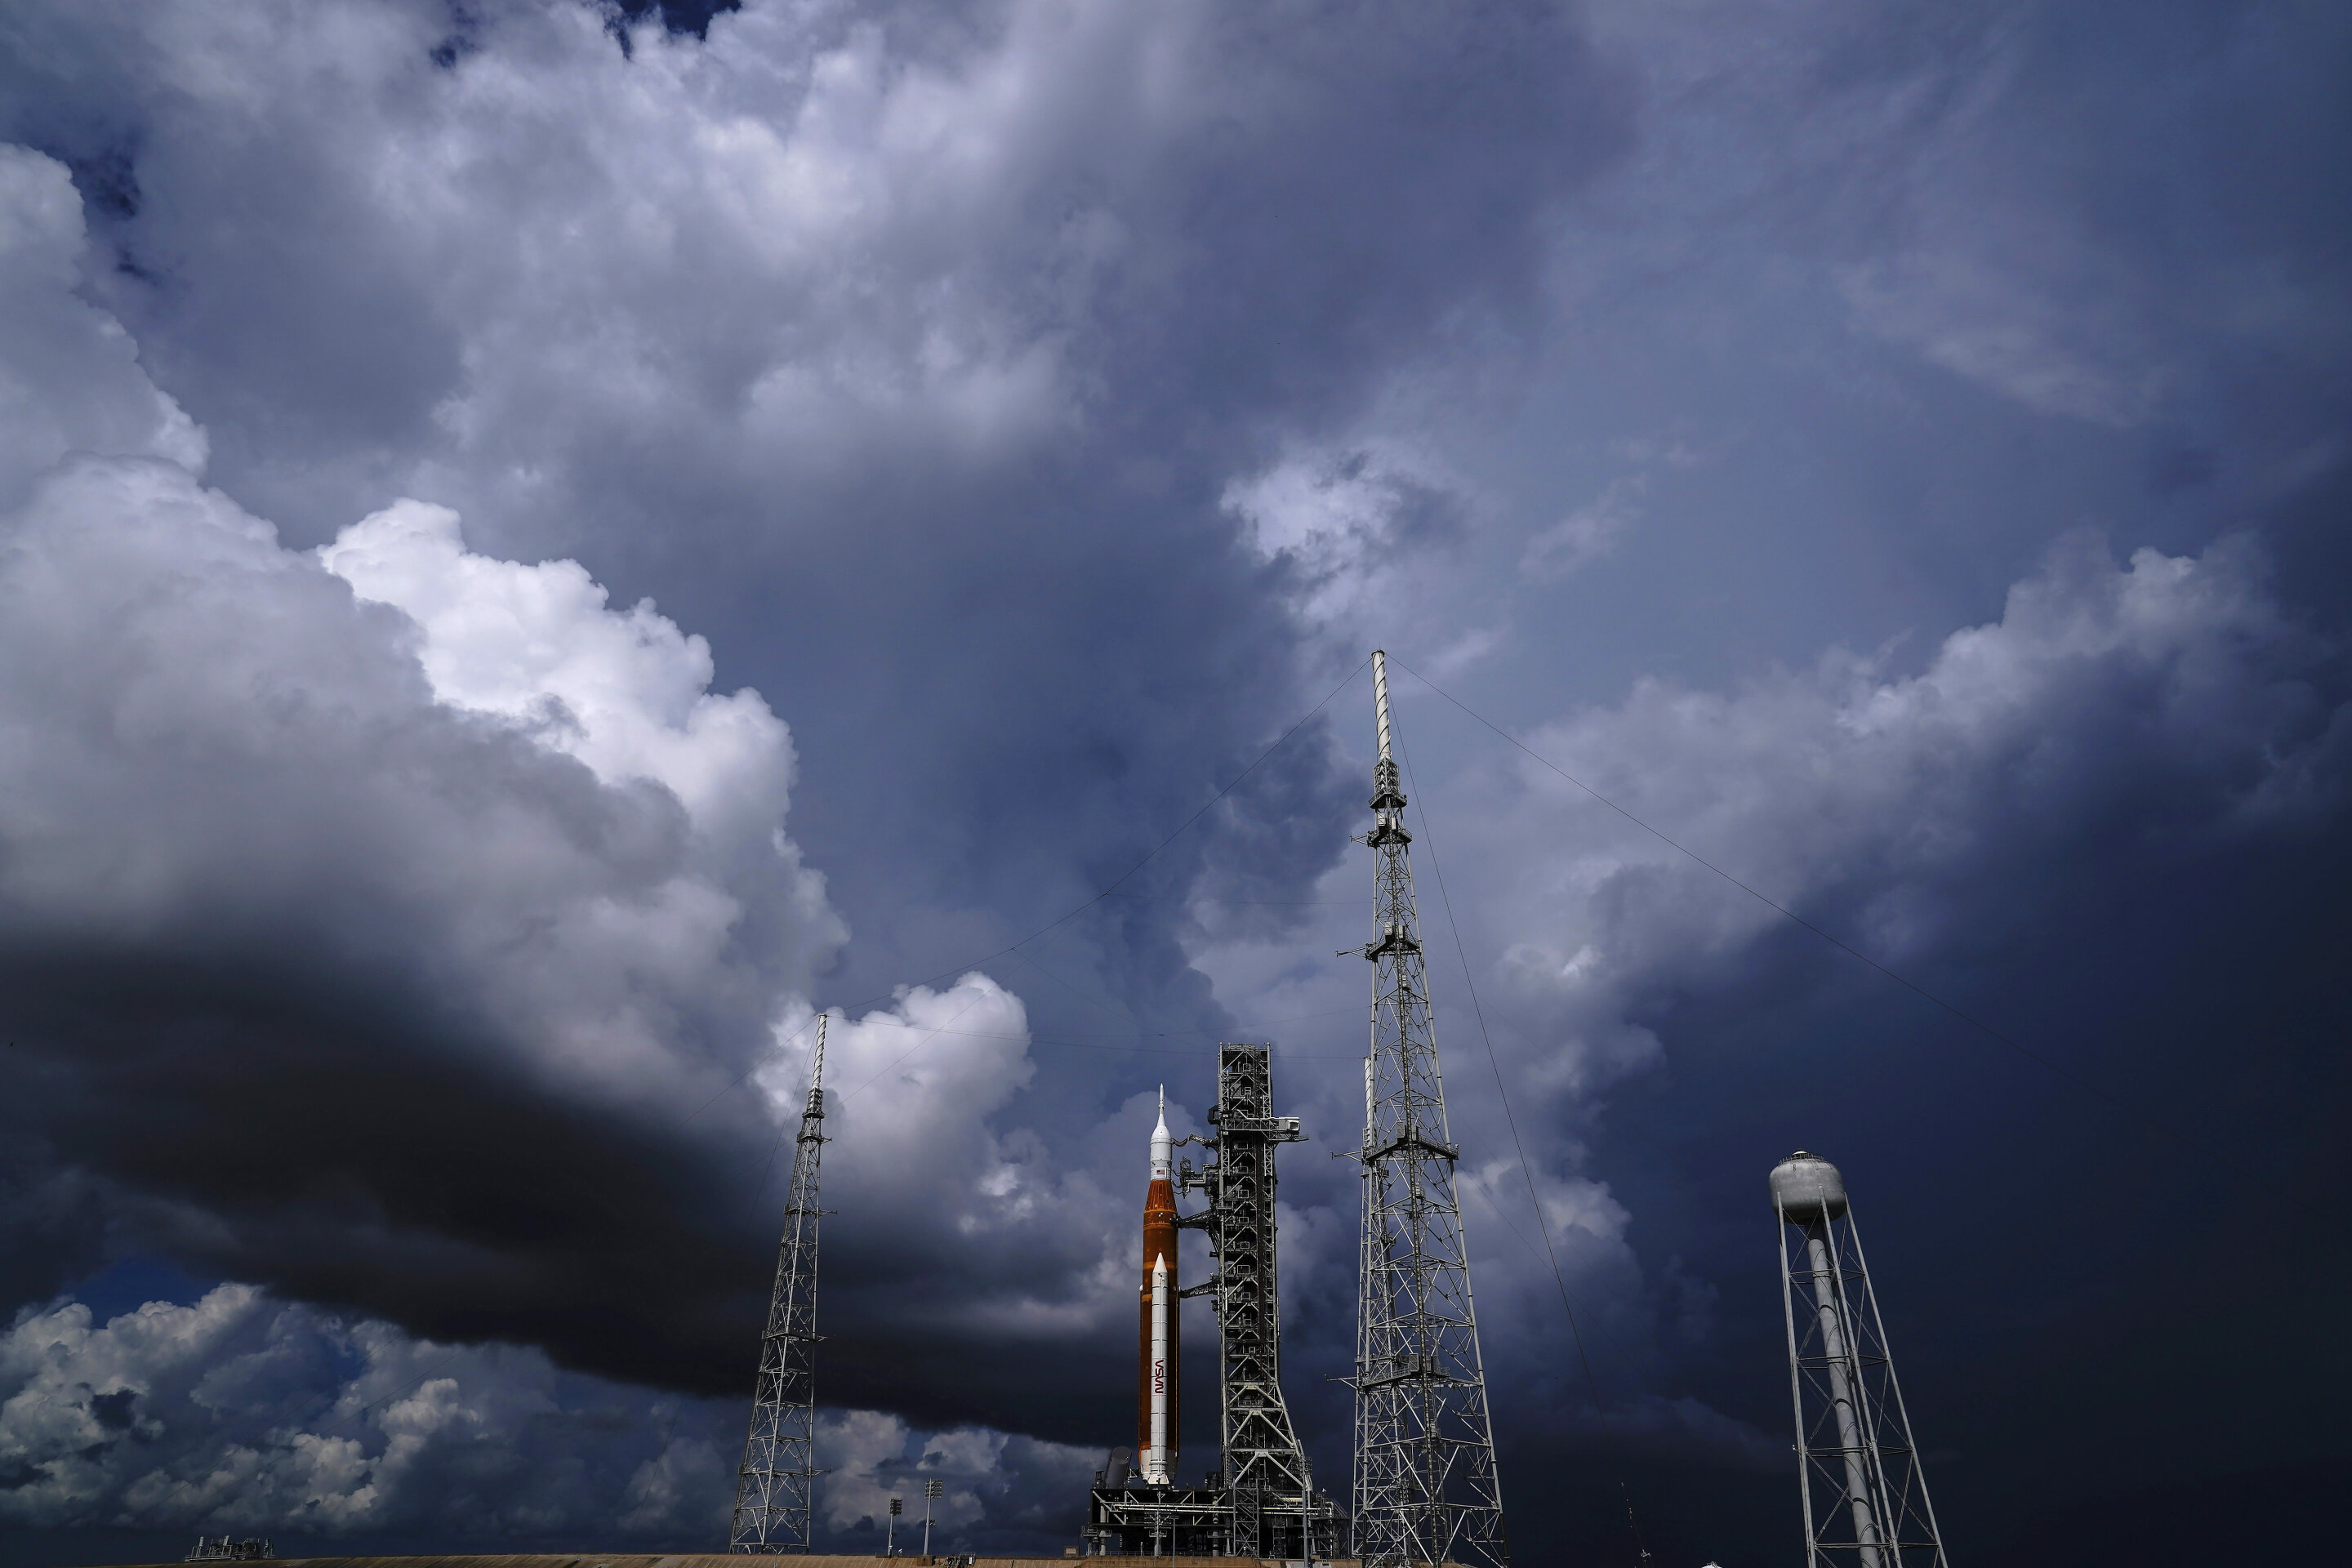 #Approaching storm may delay launch try for NASA moon rocket